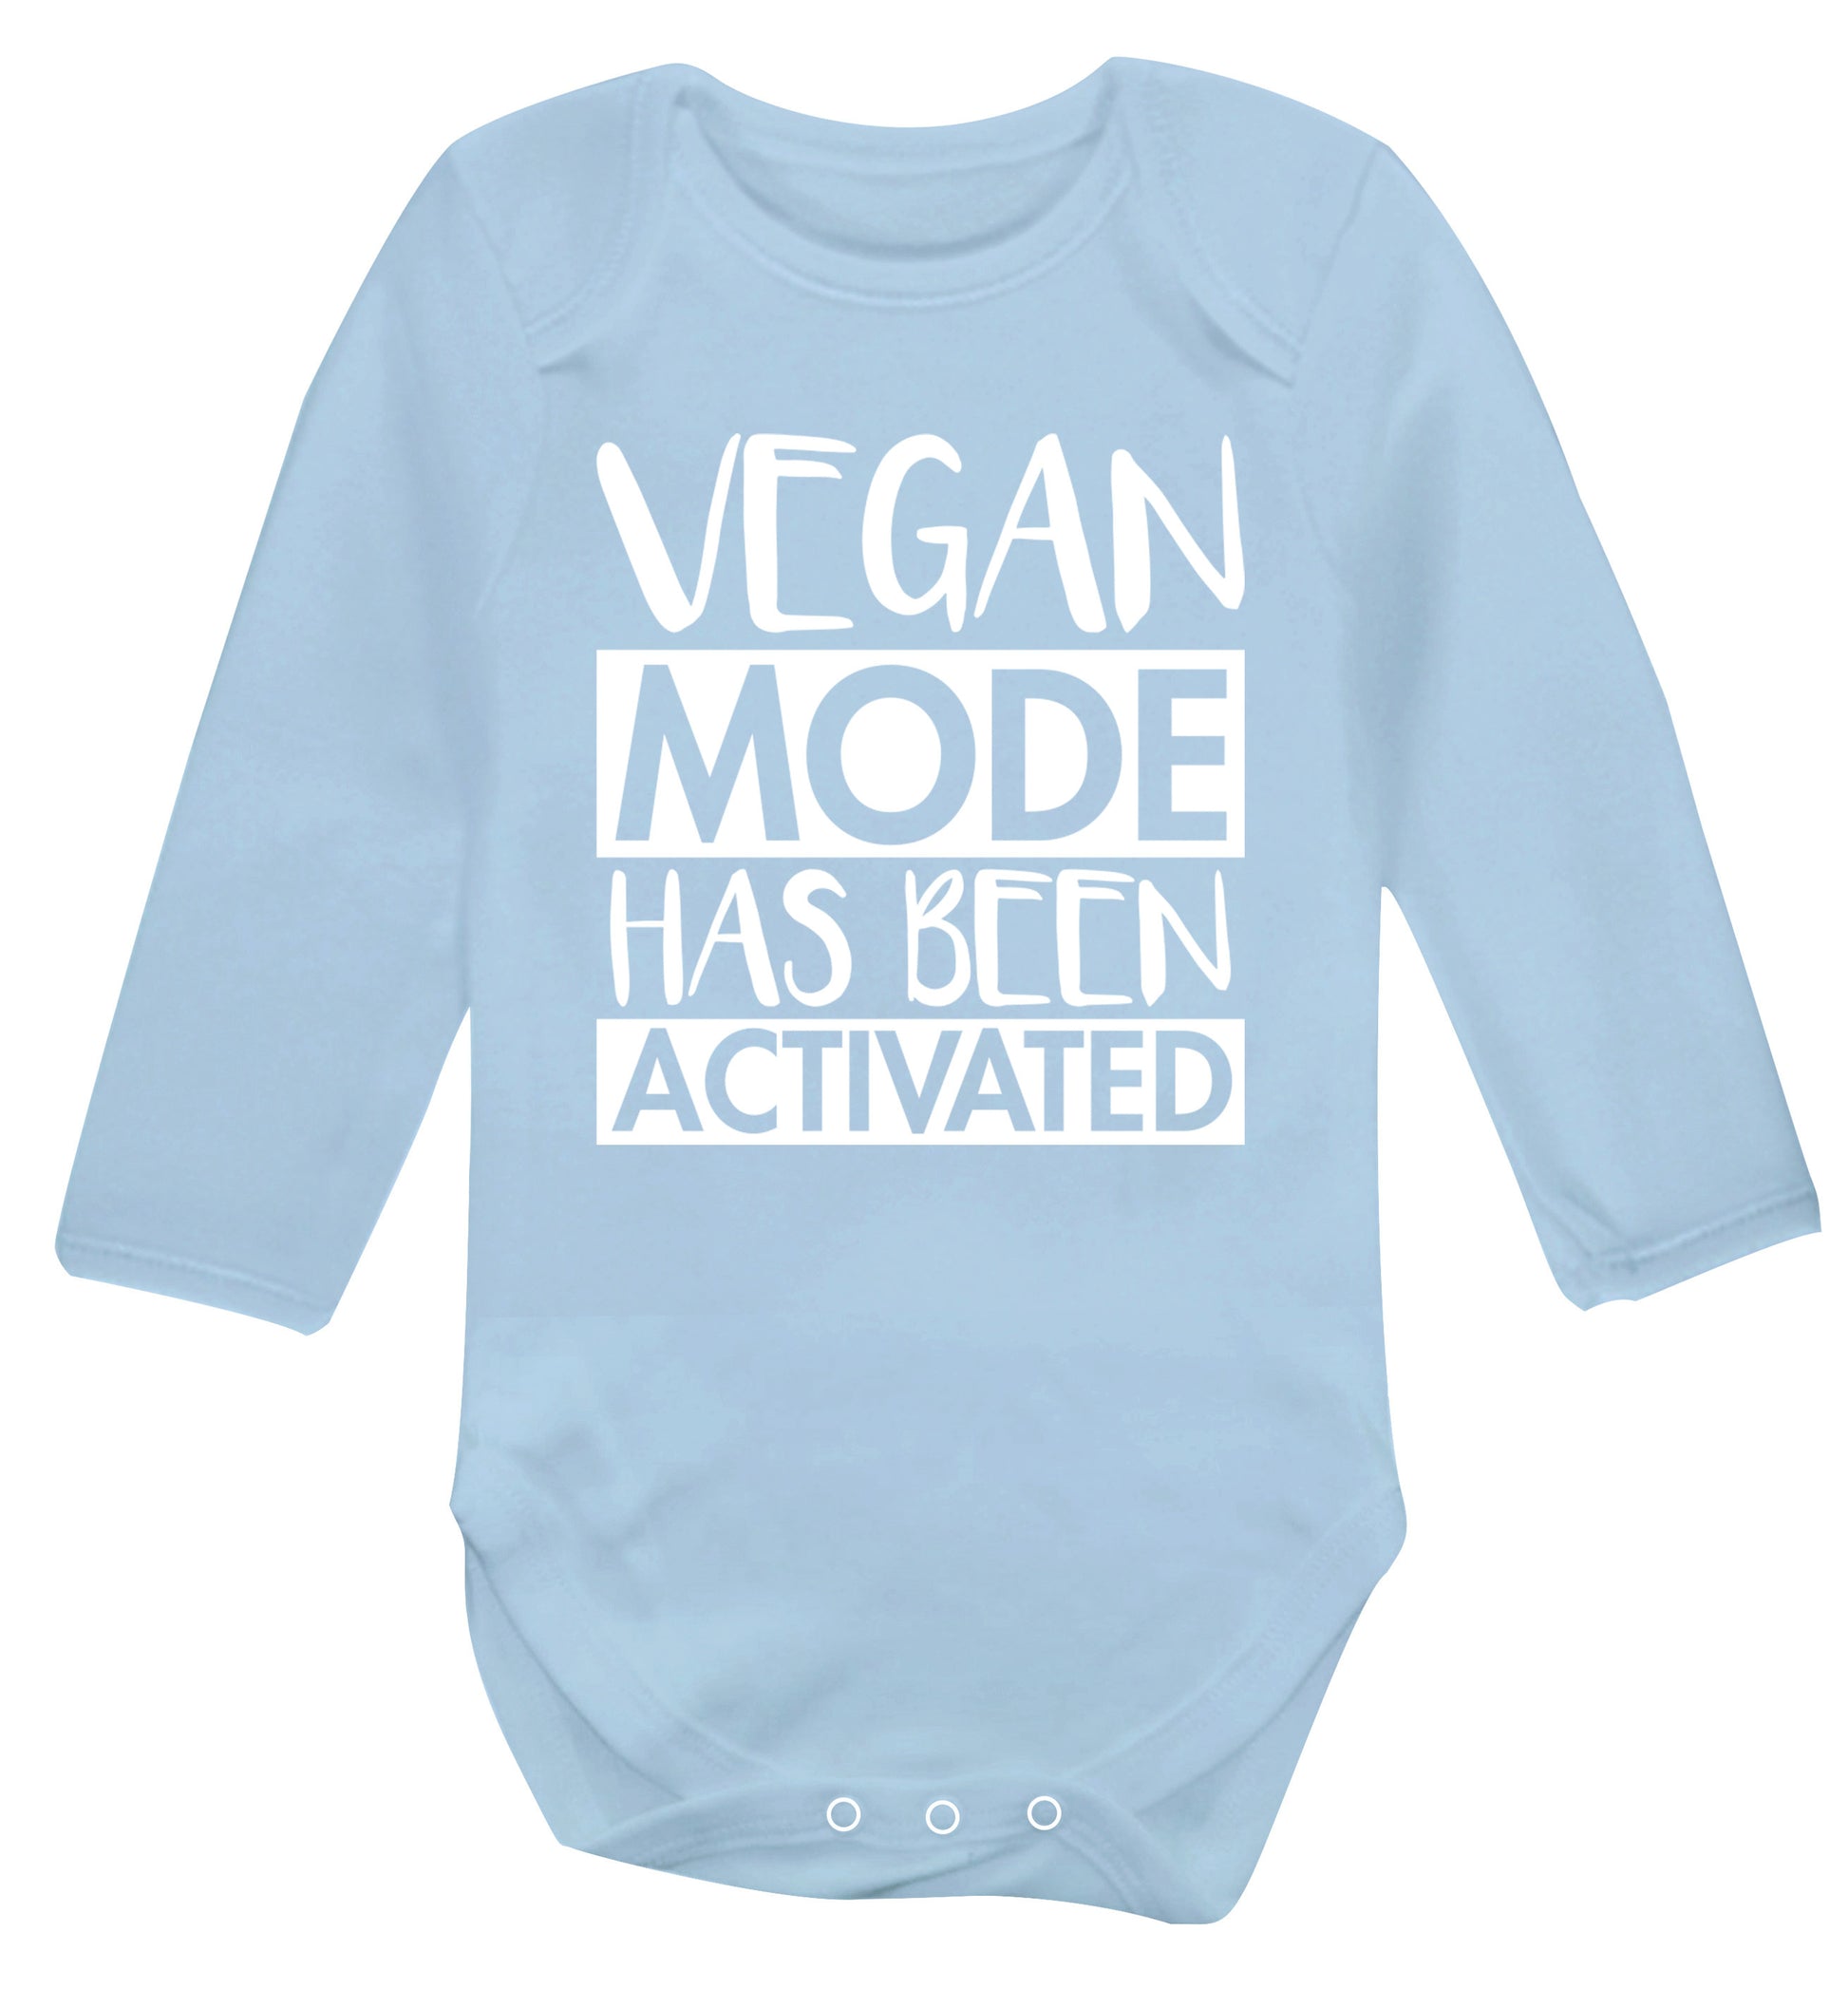 Vegan mode activated Baby Vest long sleeved pale blue 6-12 months